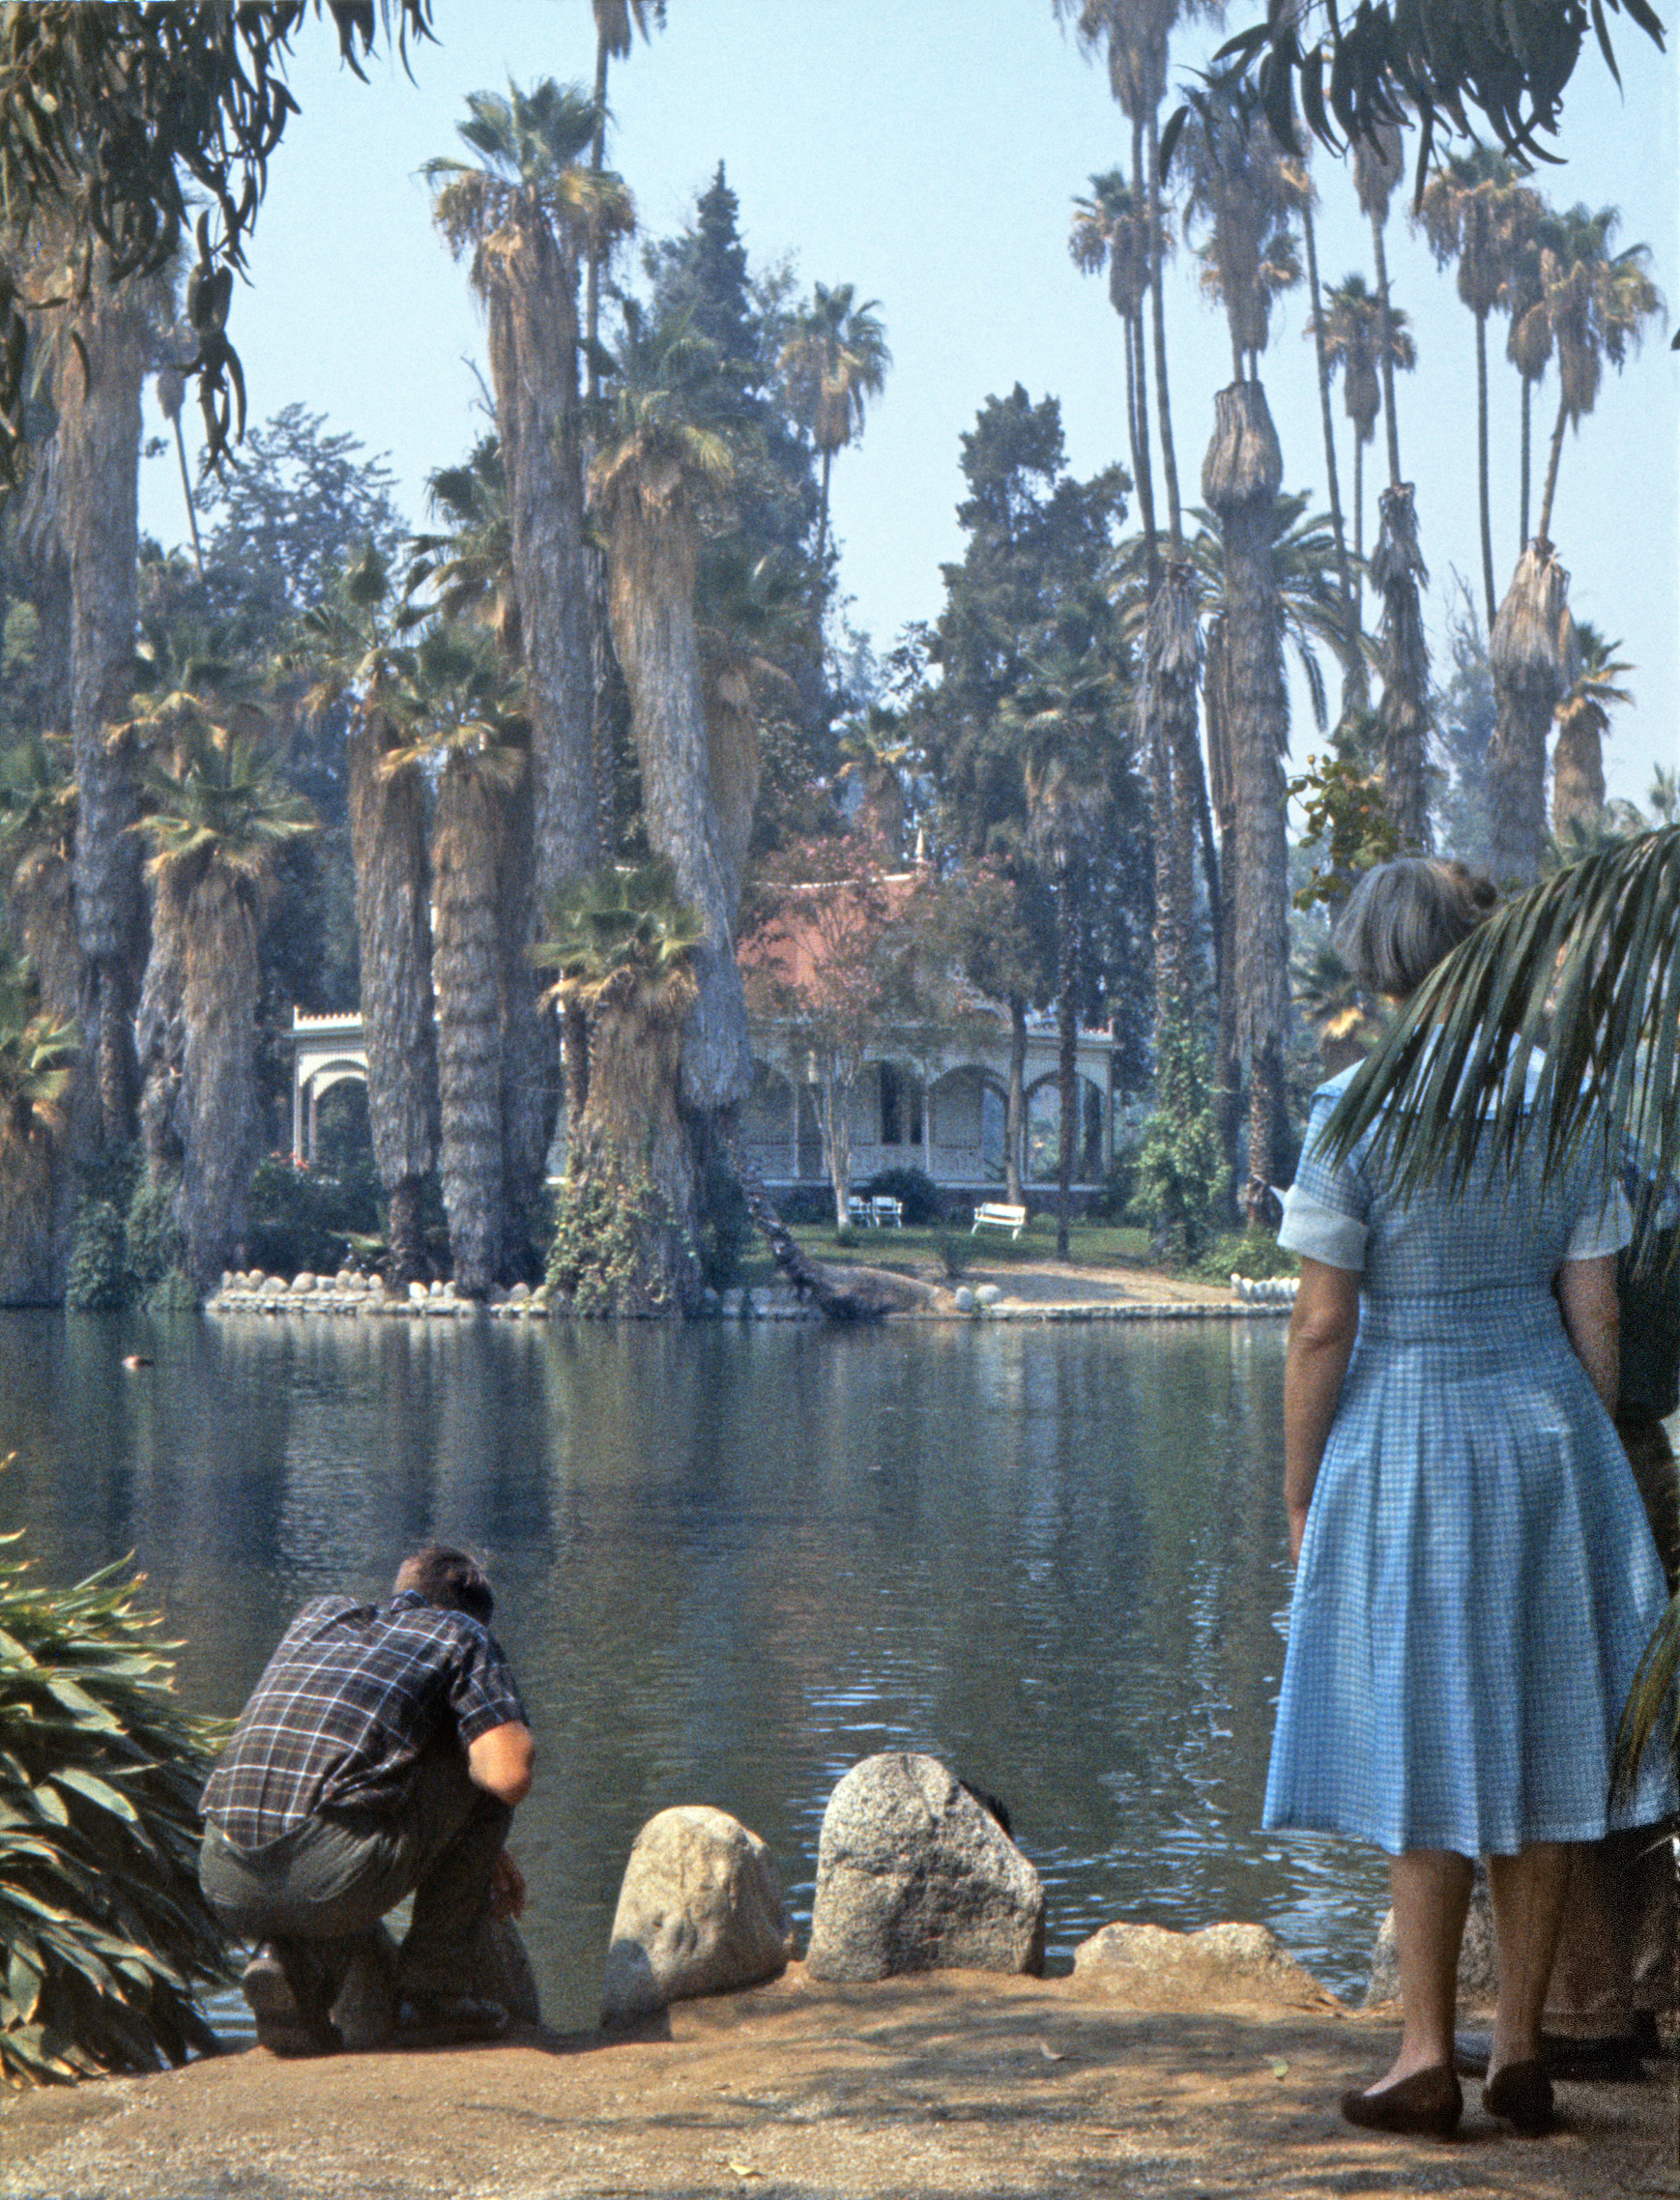 The Los Angeles County Arboretum in Arcadia, California. I'm looking at a duck while my mother and almost-visible father stand by. Formerly the realm of early Los Angeles land developer E. J. "Lucky" Baldwin, the jungle-like grounds have been used in hundreds of films and TV shows, from such illustrious entries as many Tarzans, The Lady Eve, Notorious, Road to Singapore, Passage to Marseilles, The Yearling, Marathon Man, Roots and Buffy the Vampire Slayer to the not-so-illustrious Attack of the Giant Leeches and Zombies of Mora Tau. The Queen Anne Cottage across the water was the Fantasy Island house in the opening of the TV series. Just last week we watched a 1962 Perry Mason episode filmed on the grounds. This Ektachrome was taken by my brother on our first trip to the Southland, mainly to visit my sister's family and my four-month-old nephew. It was also my first visit to Disneyland, upon which my brother expended one whole photo, incidentally capturing my elbow in the process. For some inexplicable reason (though possibly economic: Well, your brother will be taking pictures.), I didn't take my own camera along. View full size.